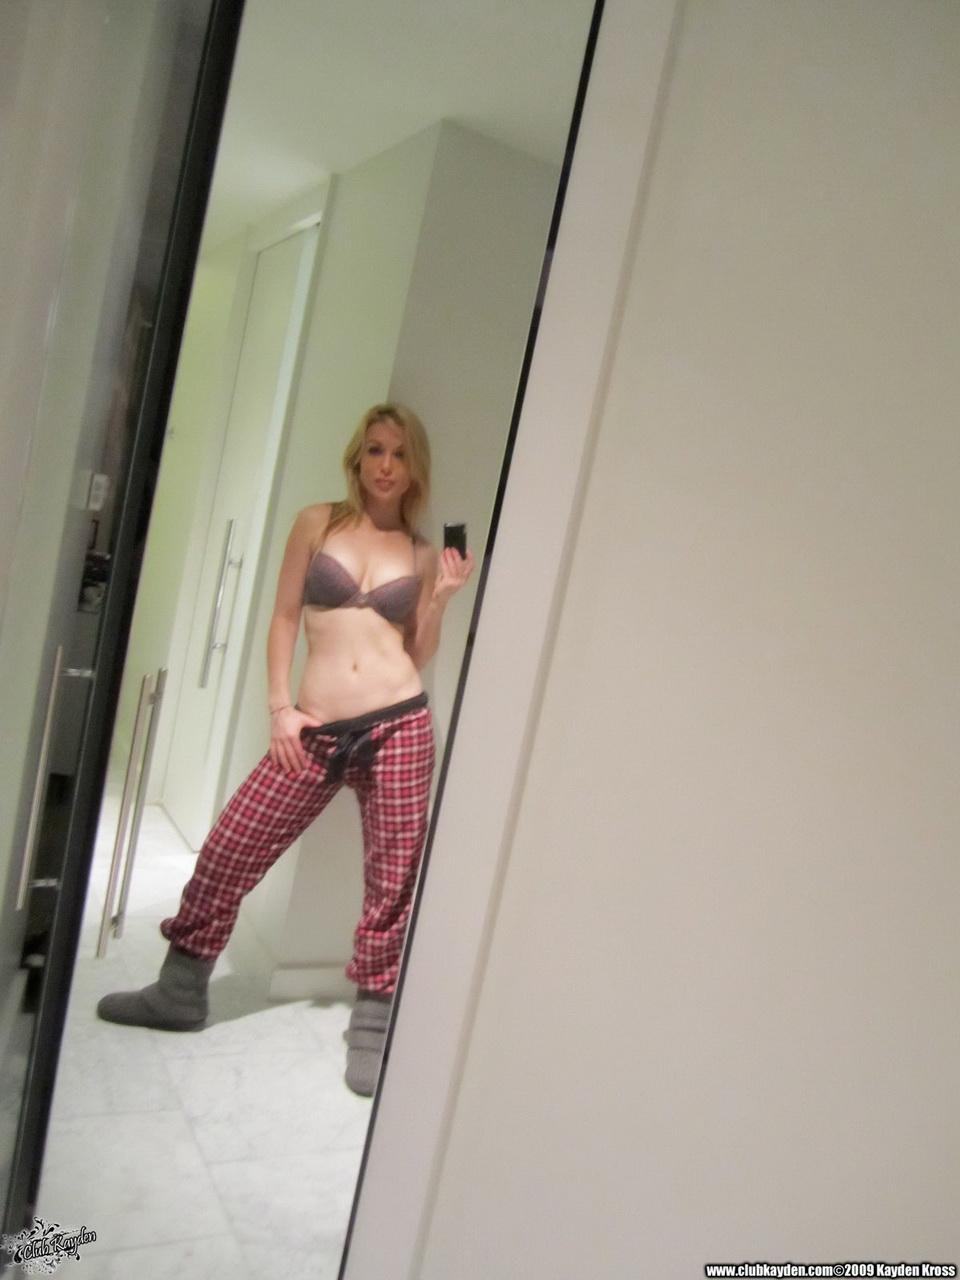 Pictures of Kayden Kross taking naughty pictures of herself in the mirror #58168682